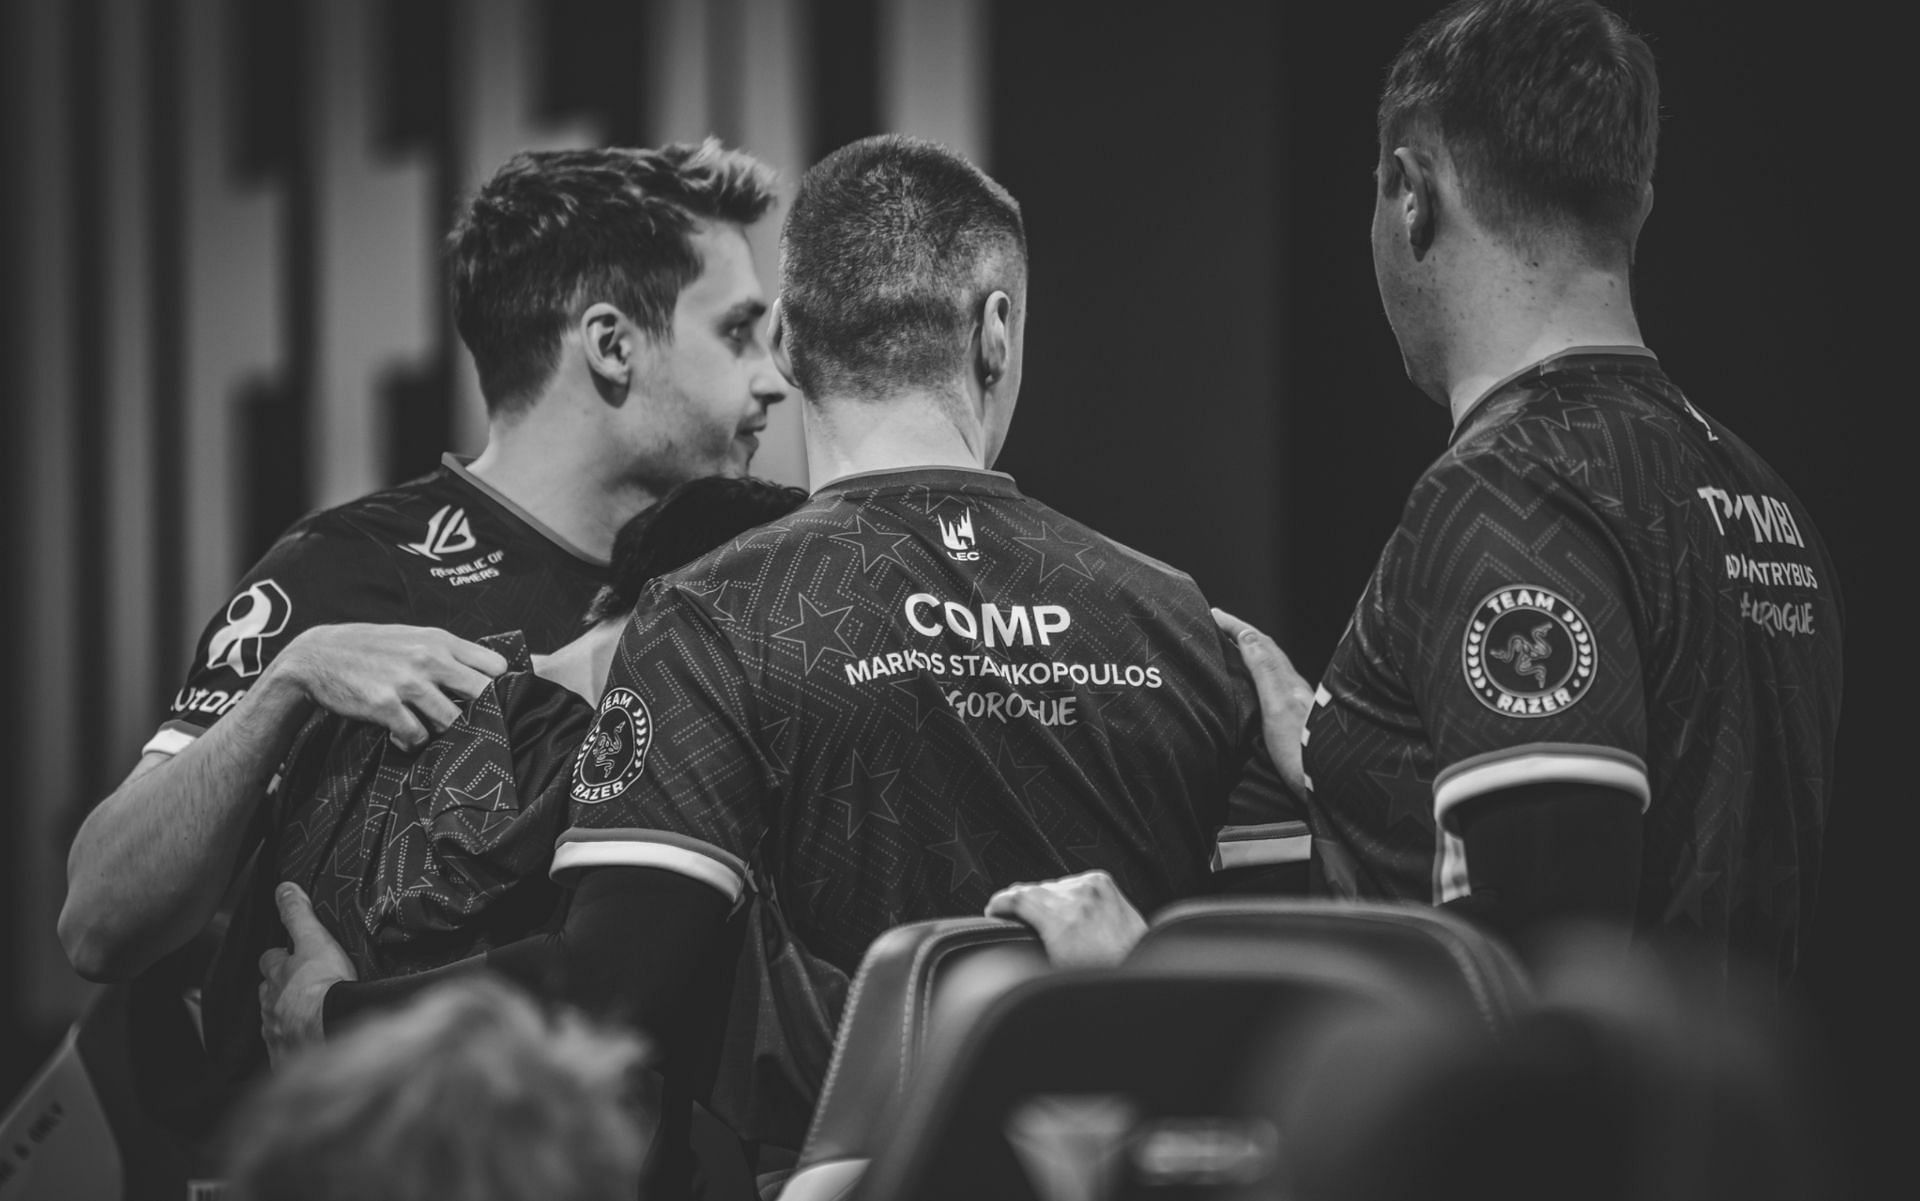 Rogue was the last western team to say goodbye to Worlds 2022 (Image via Riot Games)